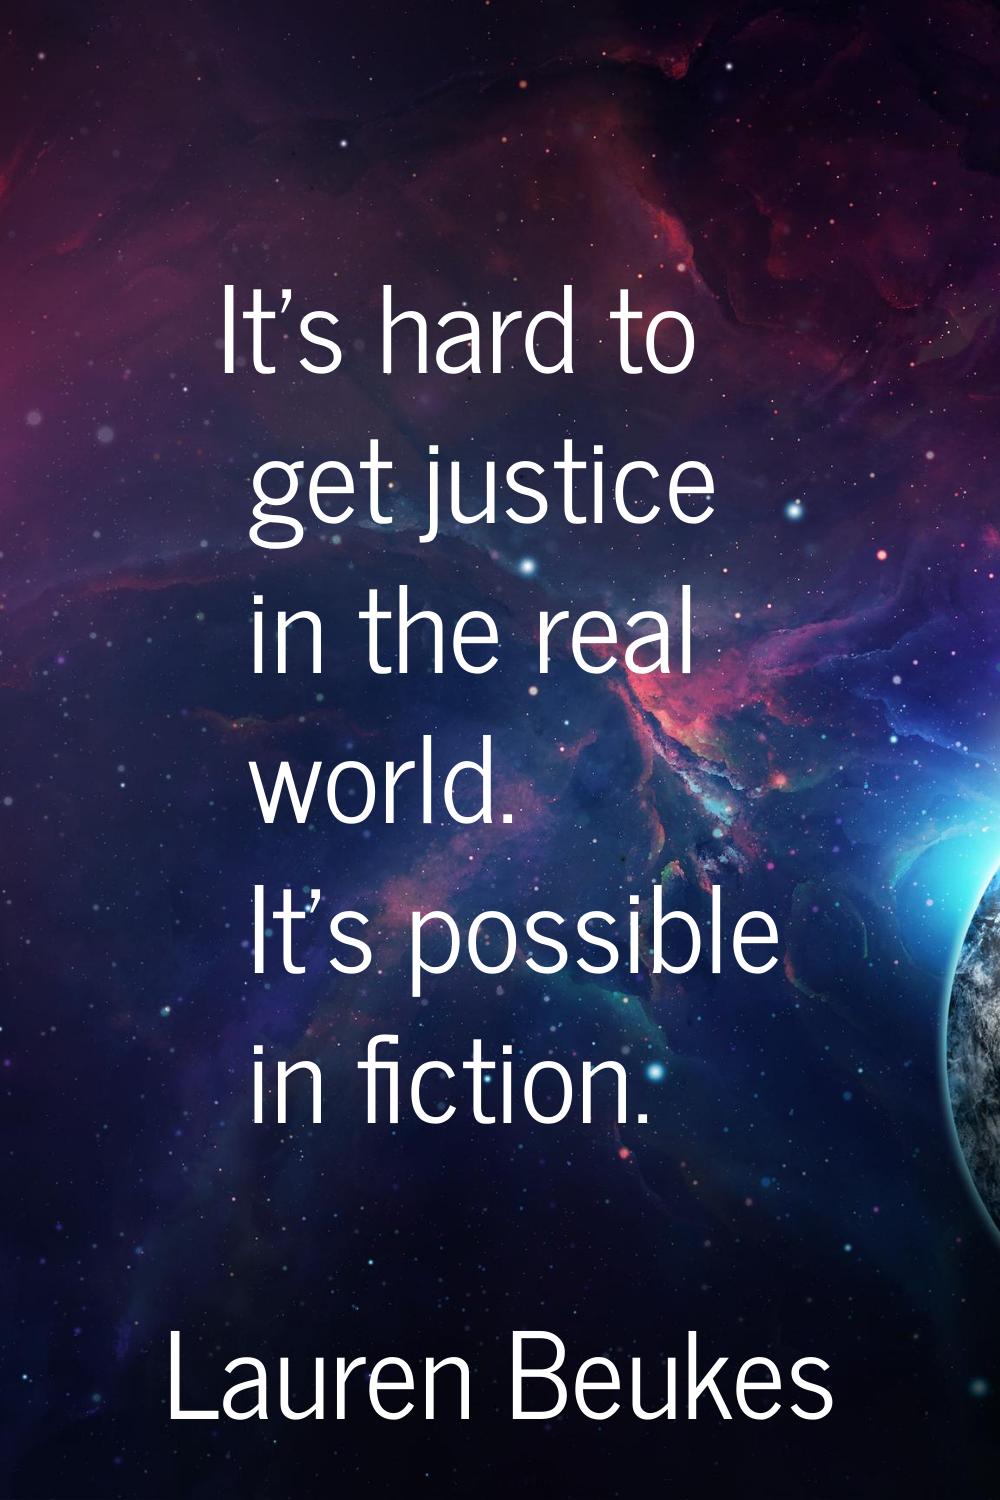 It's hard to get justice in the real world. It's possible in fiction.